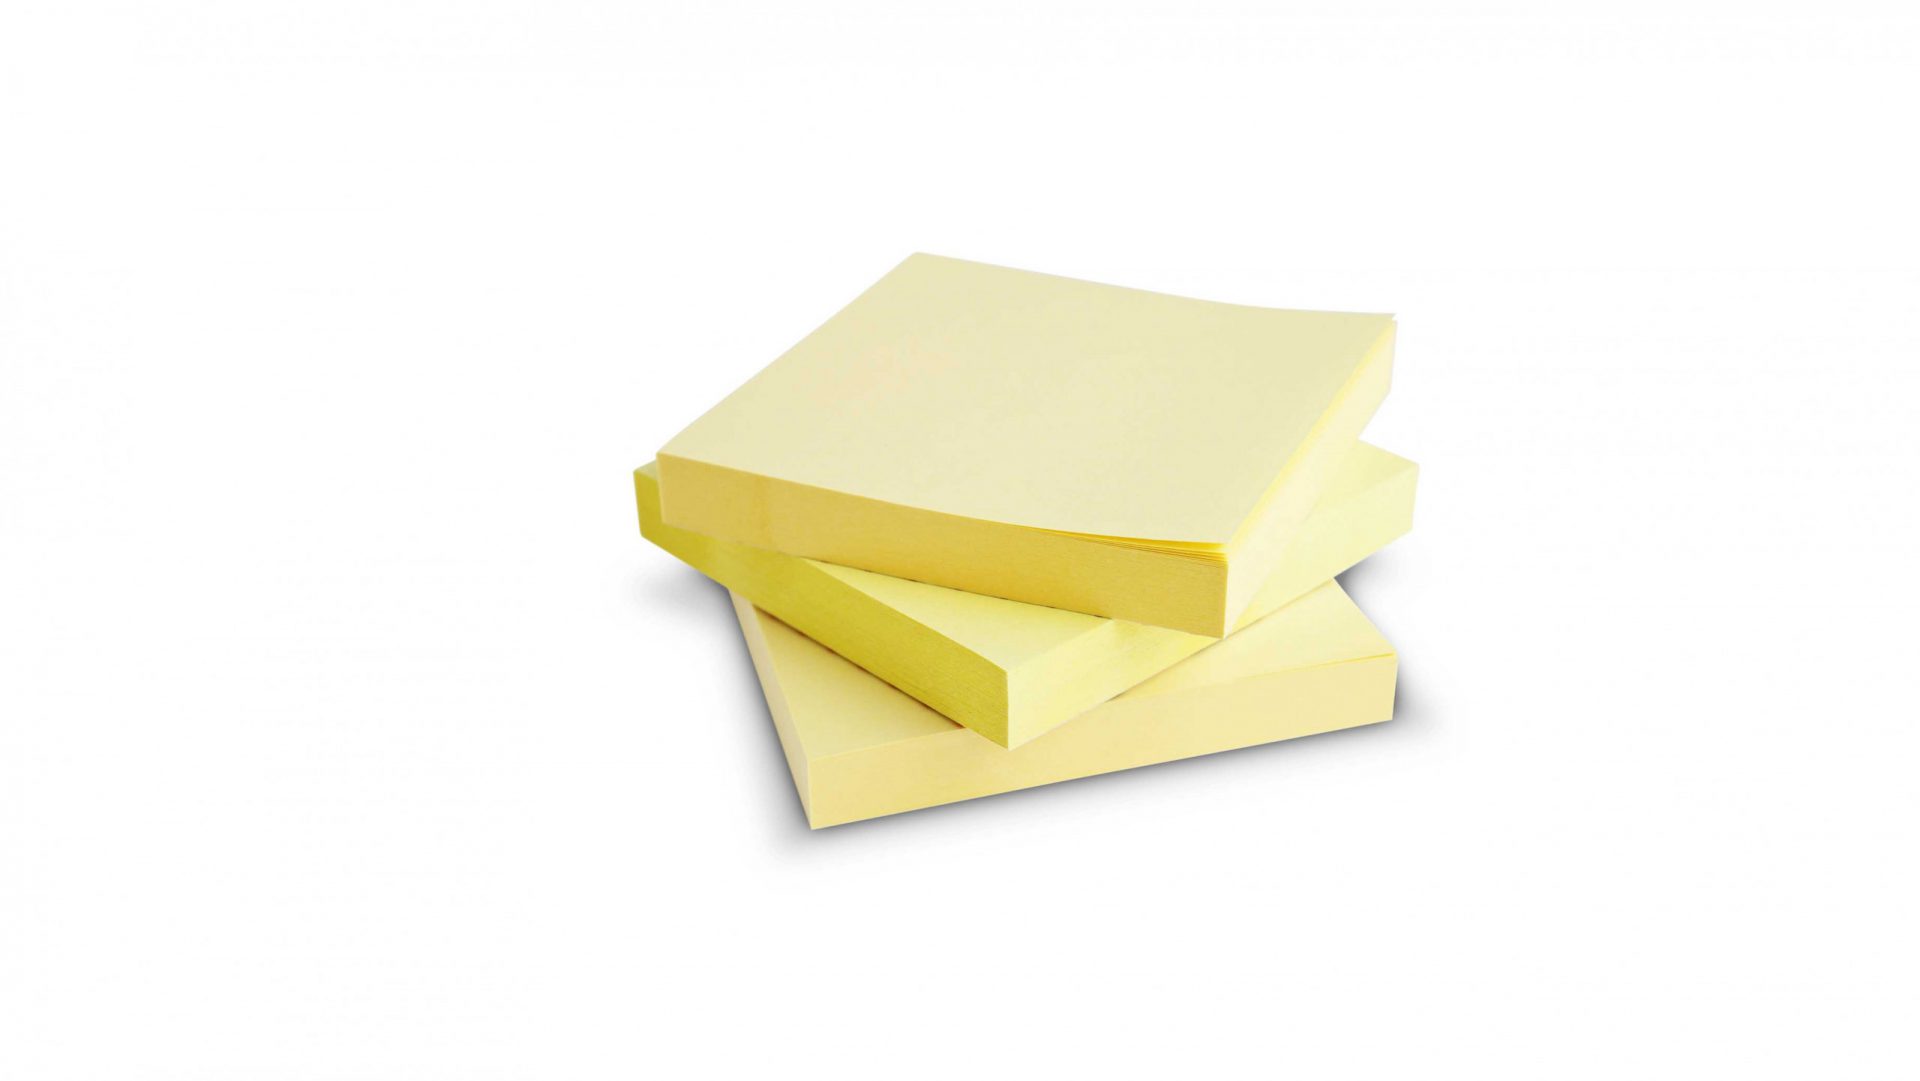 The Post-it : An accidental invention that stuck - DesignWanted